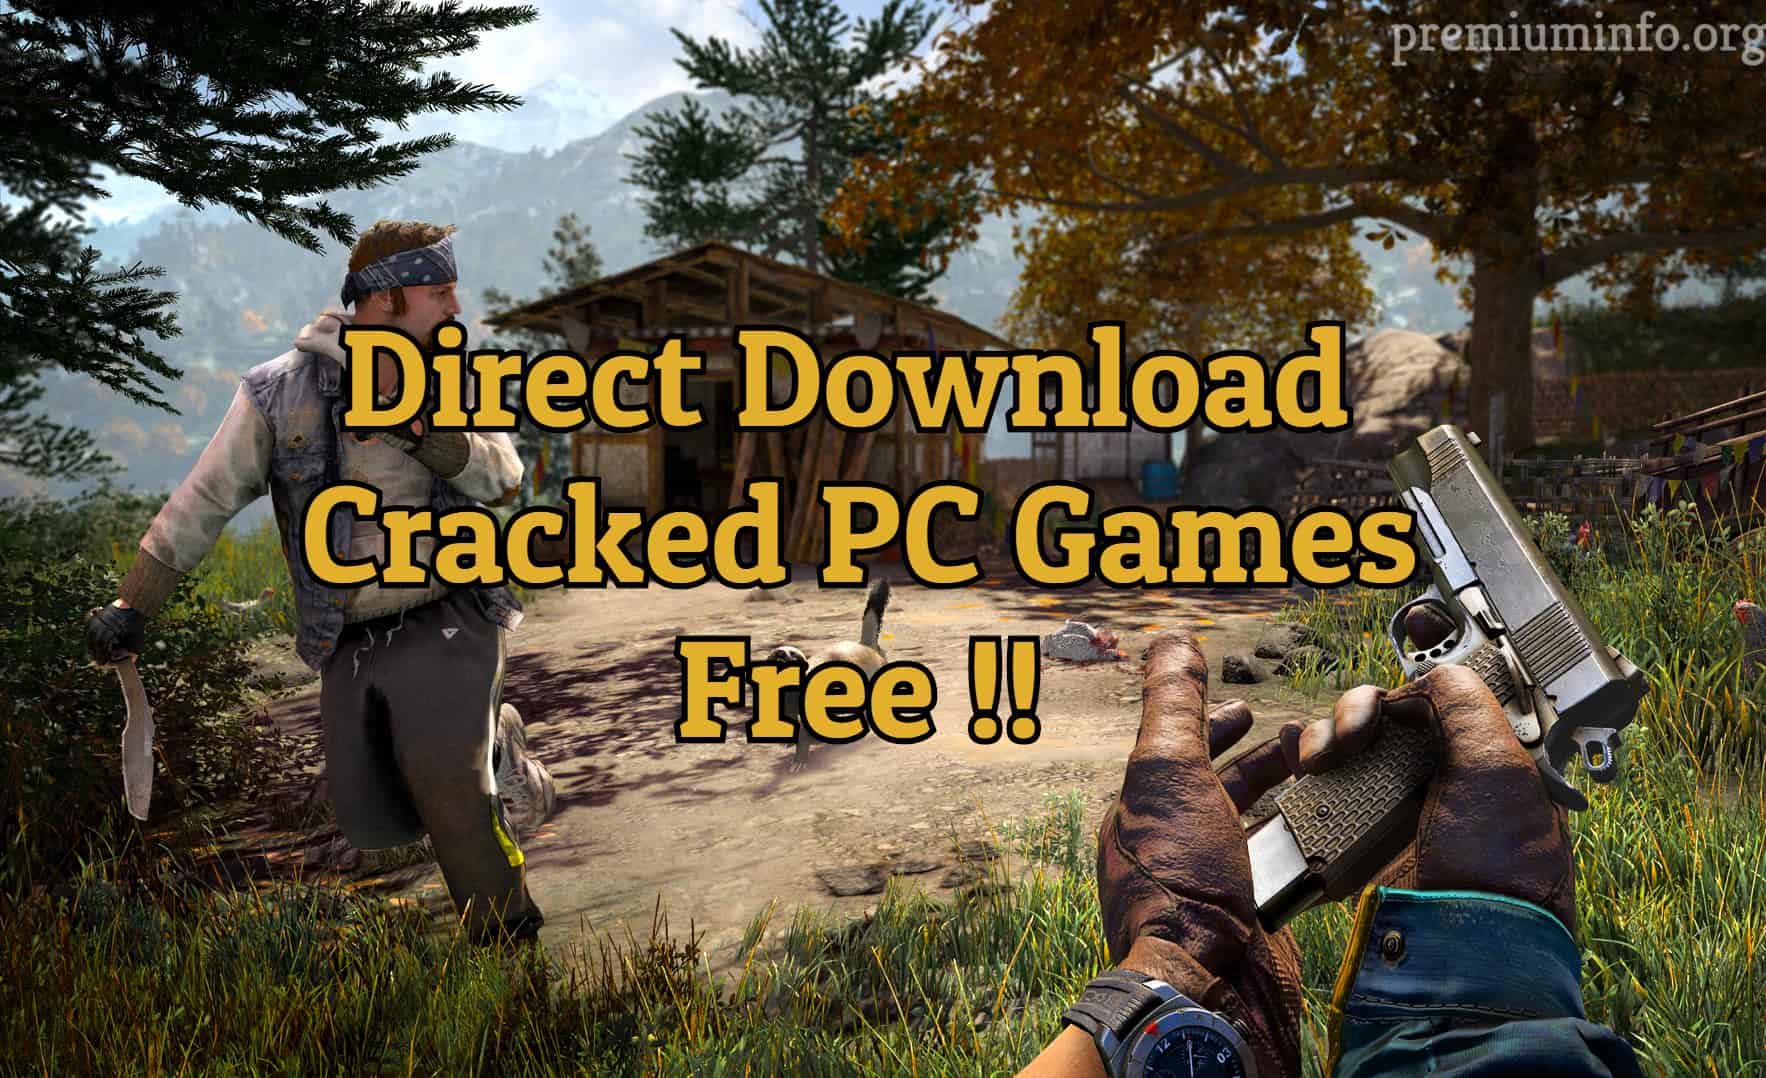 Best Sites to Download Cracked PC Games For Windows 7/8/8.1/10 - PremiumInfo